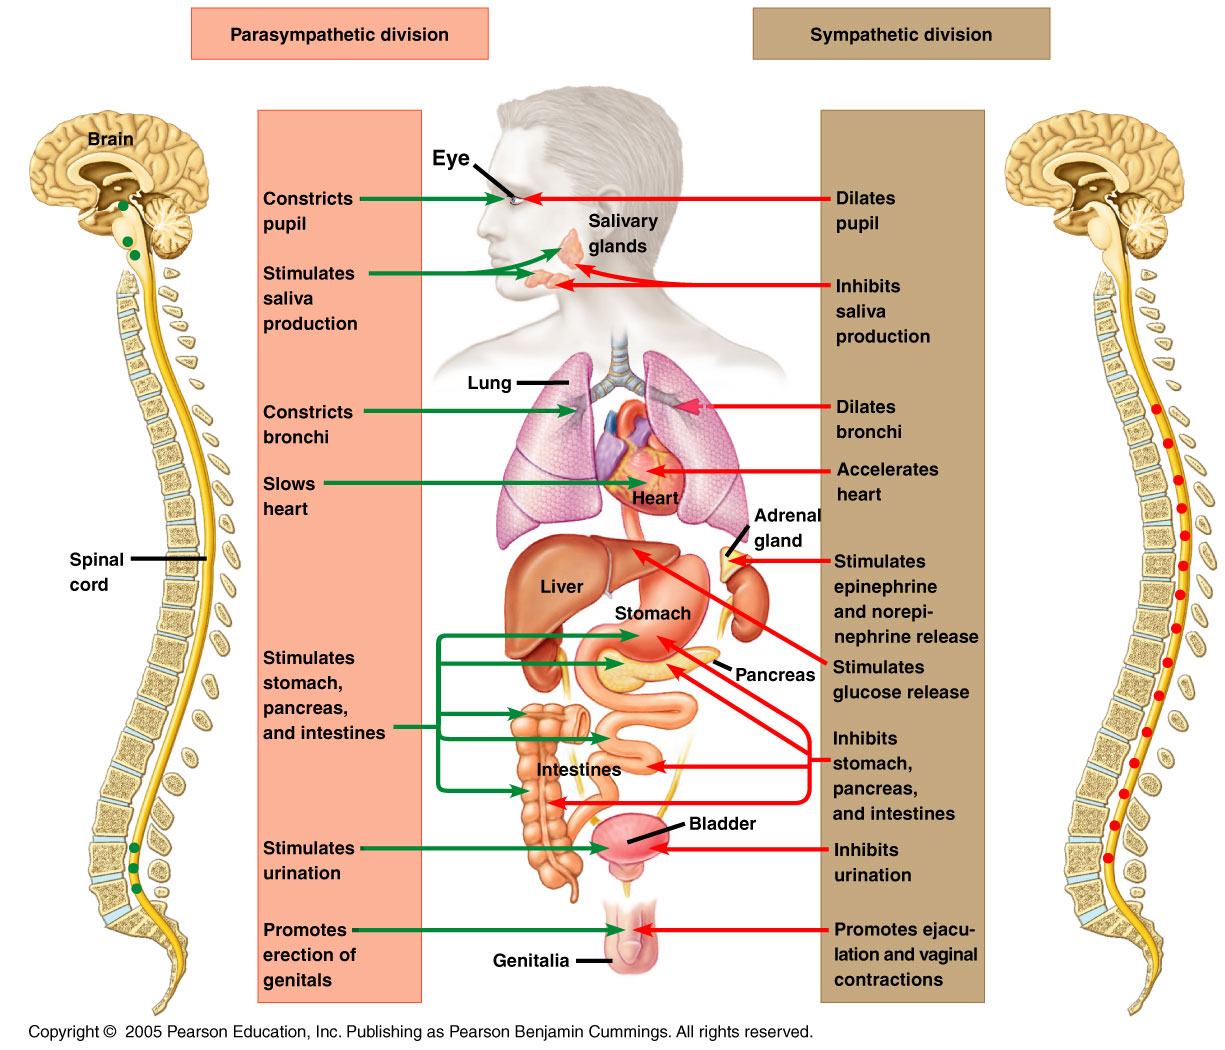 Comparison of the effects of the sympathetic and parasympathetic divisions of the autonomic nervous system